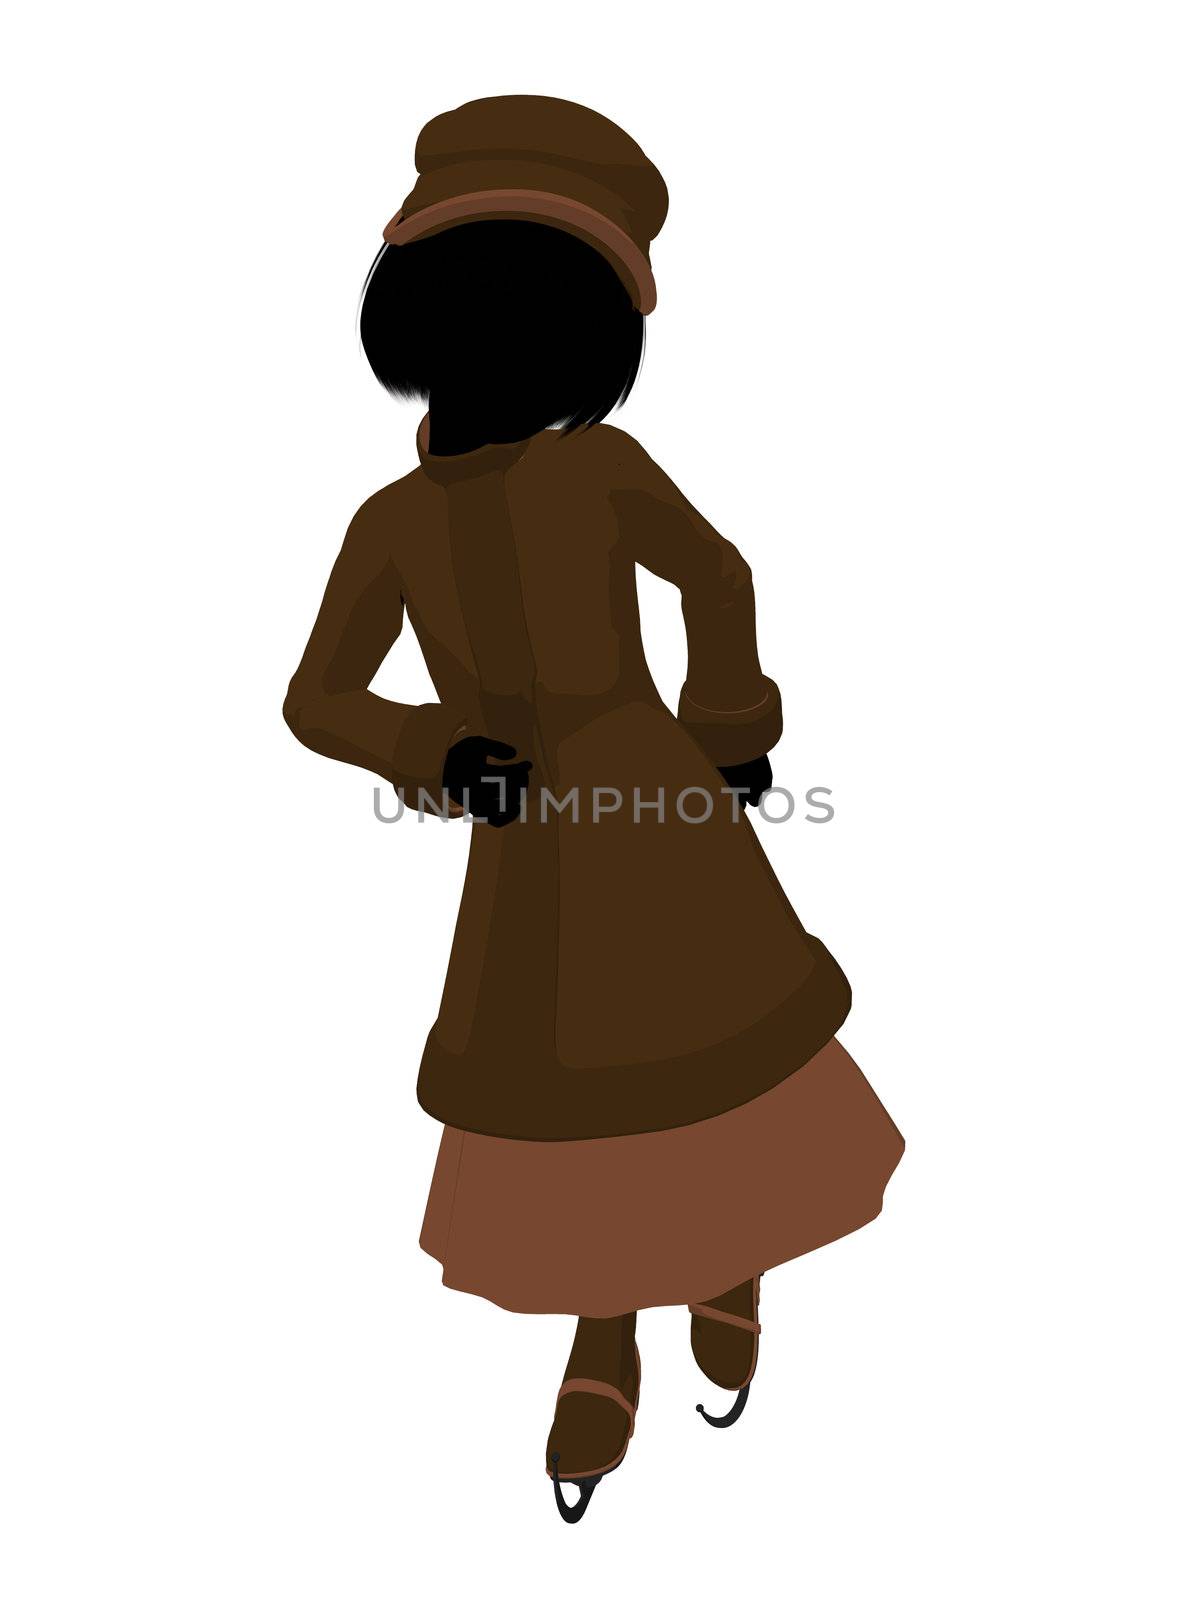 Victorian Girl Ice Skating Illustration Silhouette by kathygold